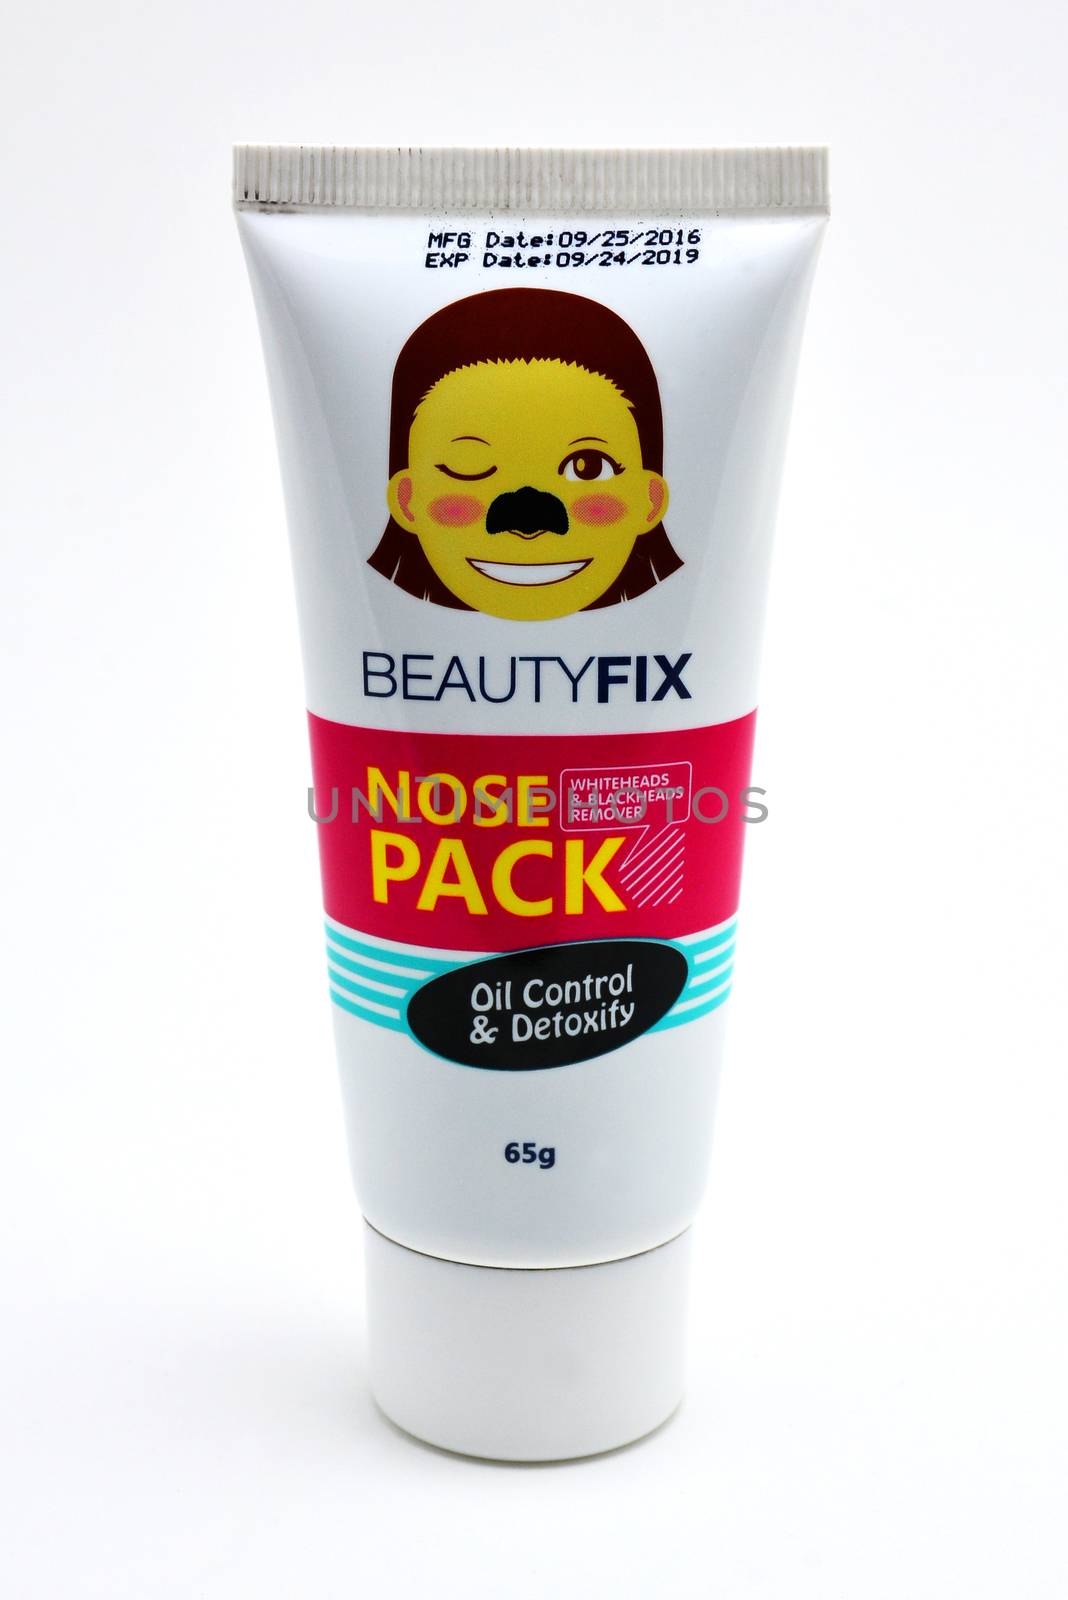 Beauty fix nose pack oil control and detoxify in Philippines by imwaltersy